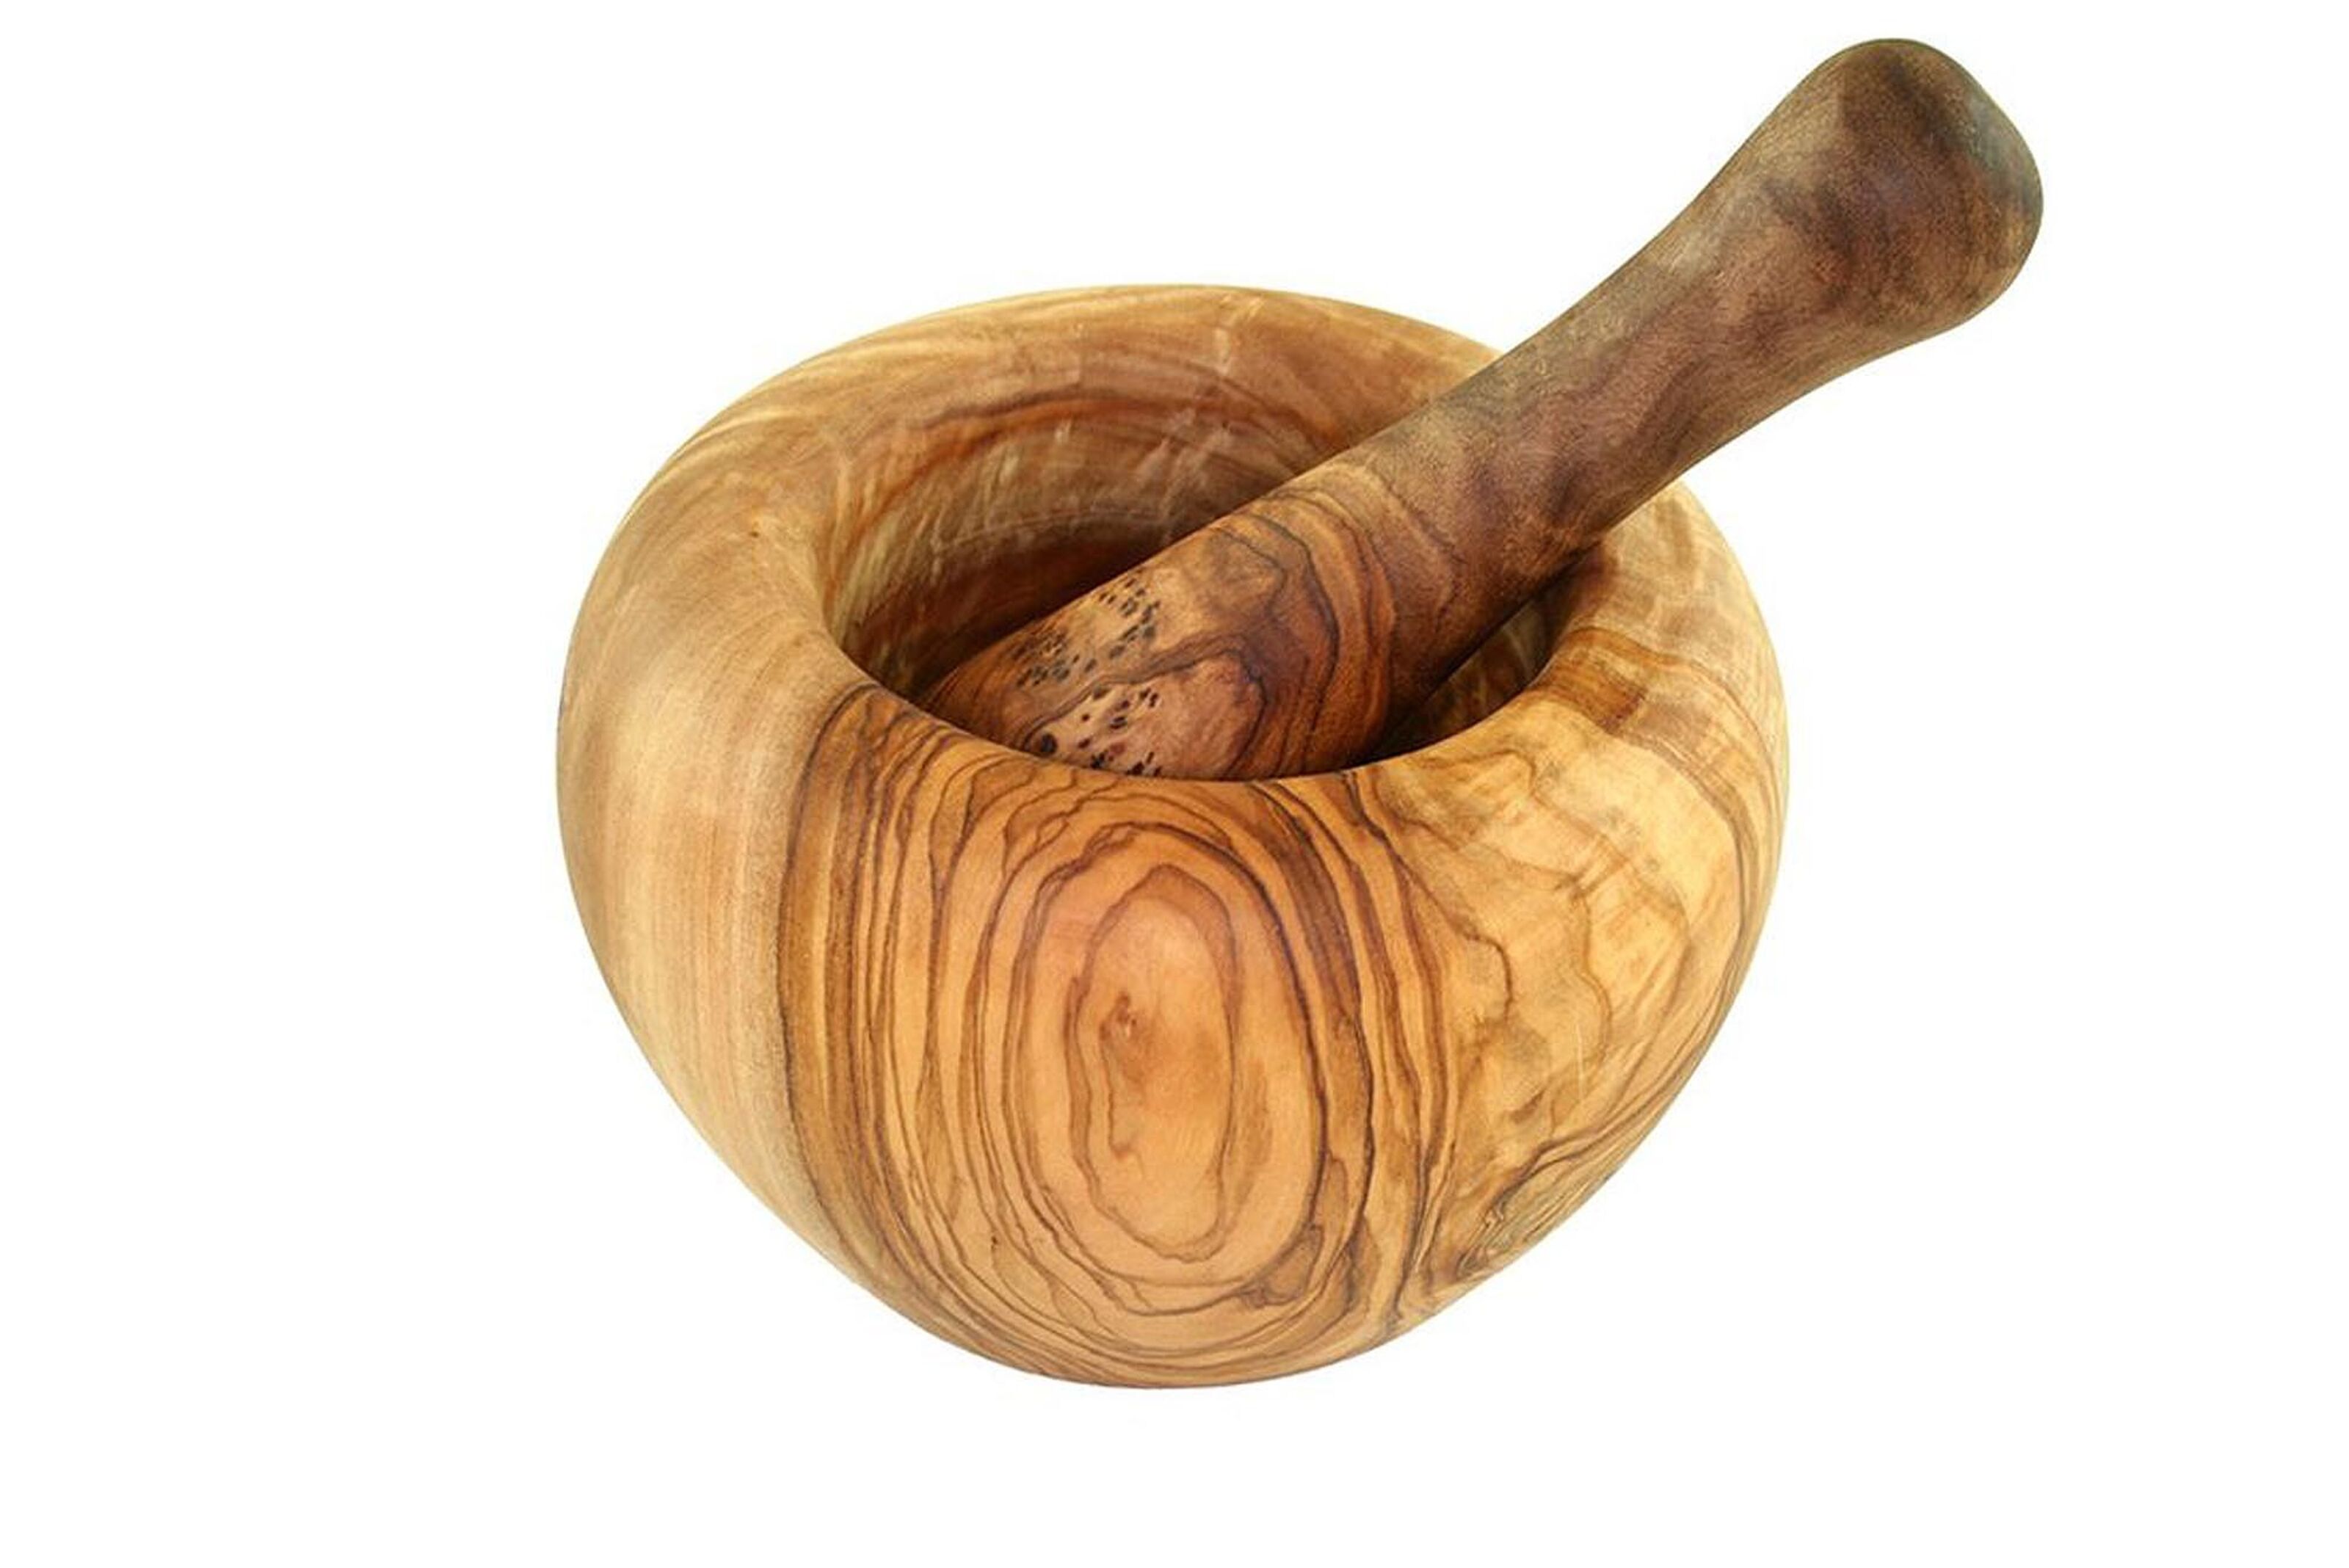 Buy wholesale Mortar round 12 including made of ground olive cm wood Ø pestle